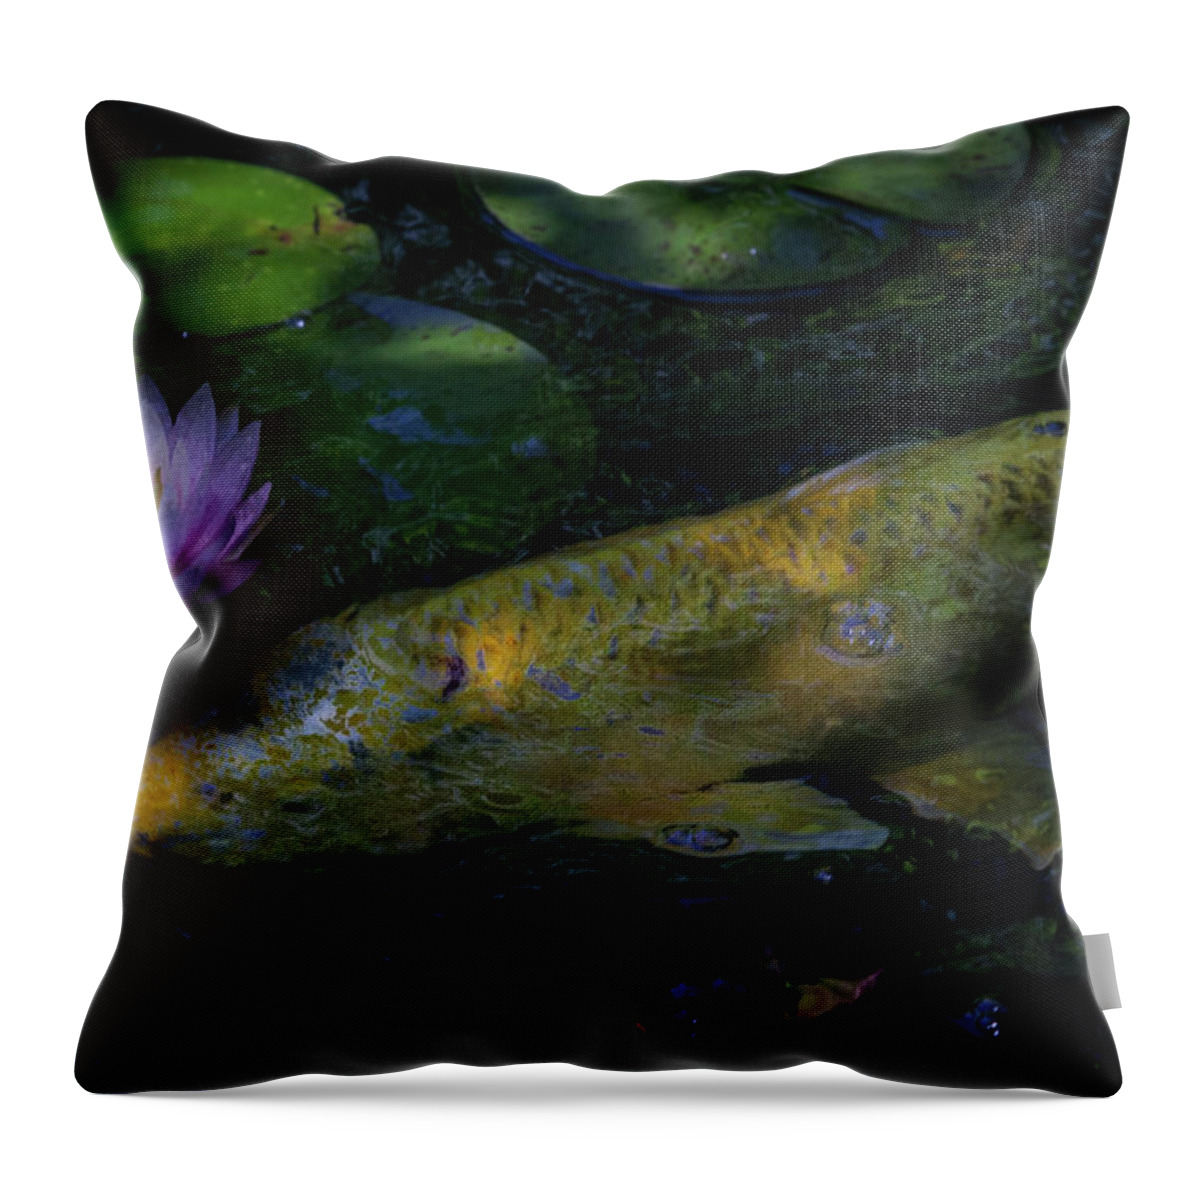 Fish Throw Pillow featuring the photograph The Visitor by David Coblitz